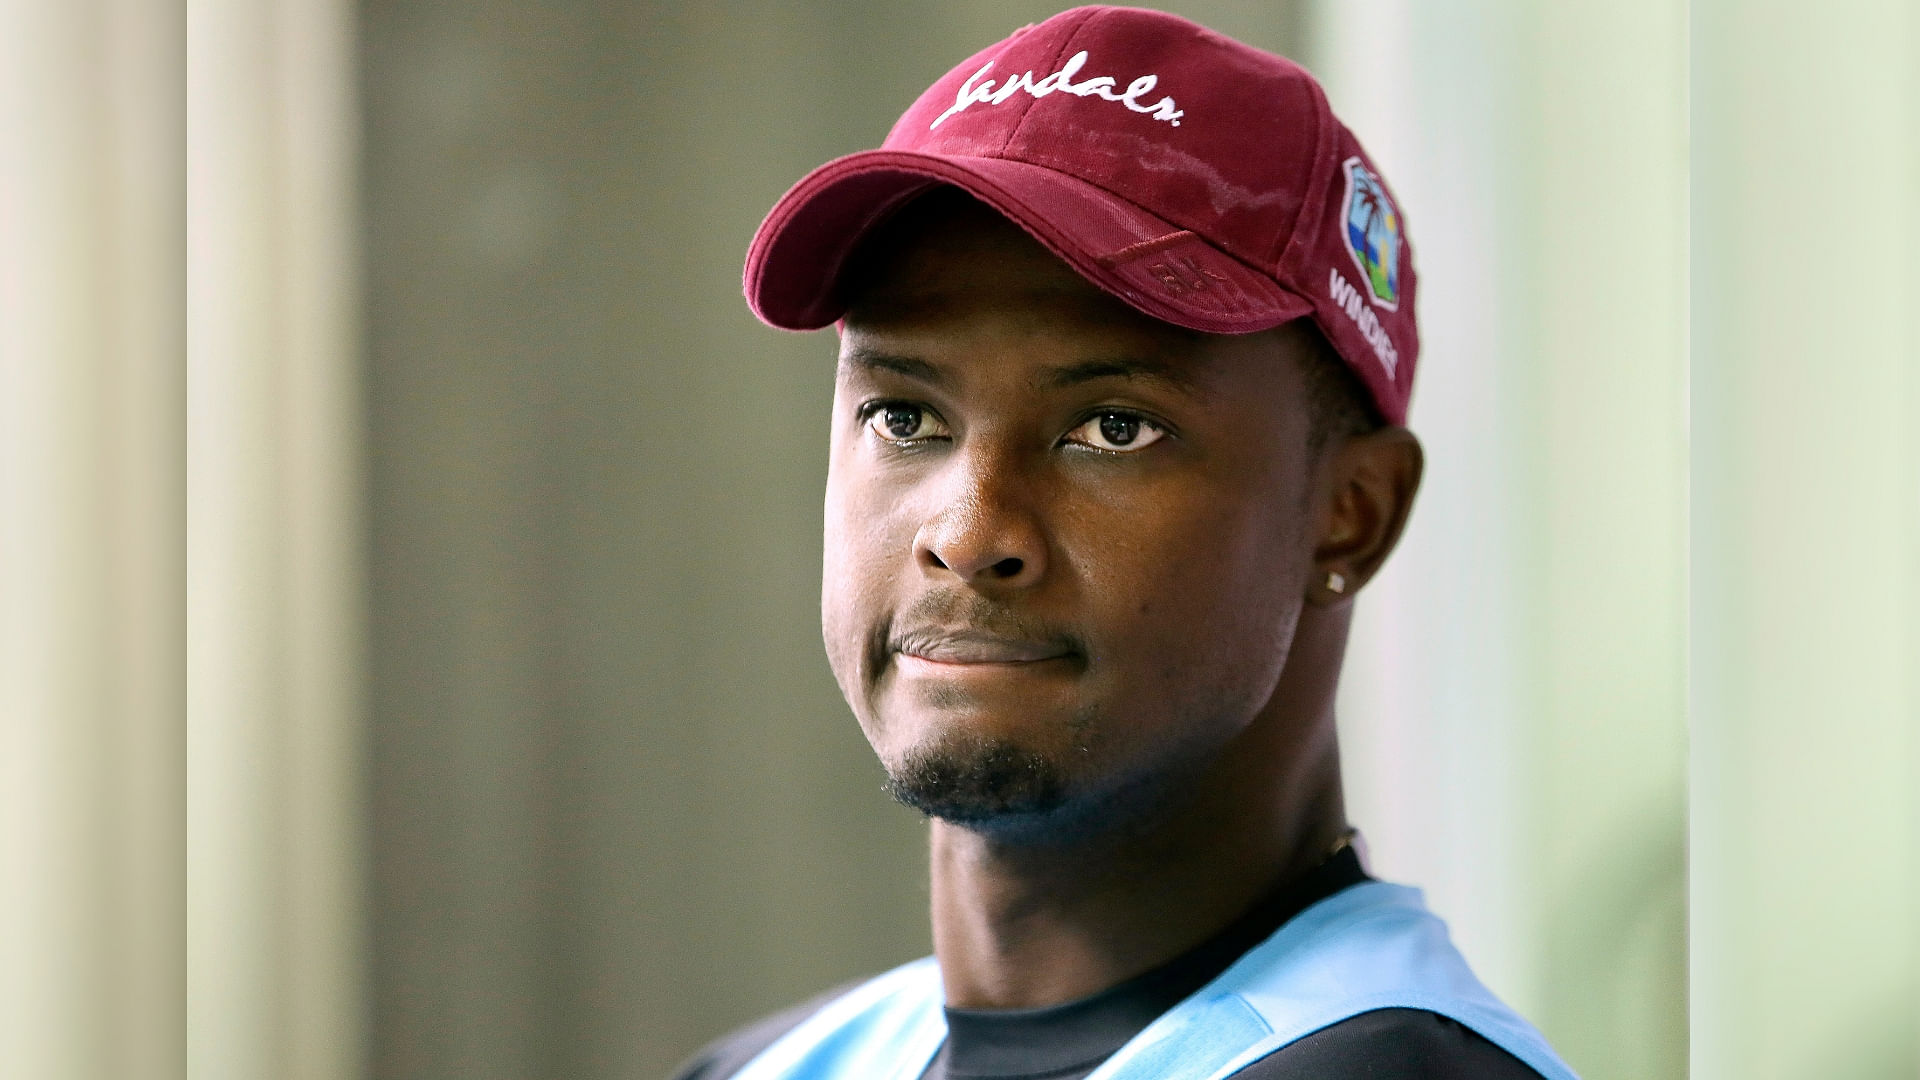 West Indies skipper Jason Holder said “you never know what’s the par score for a team like India.”